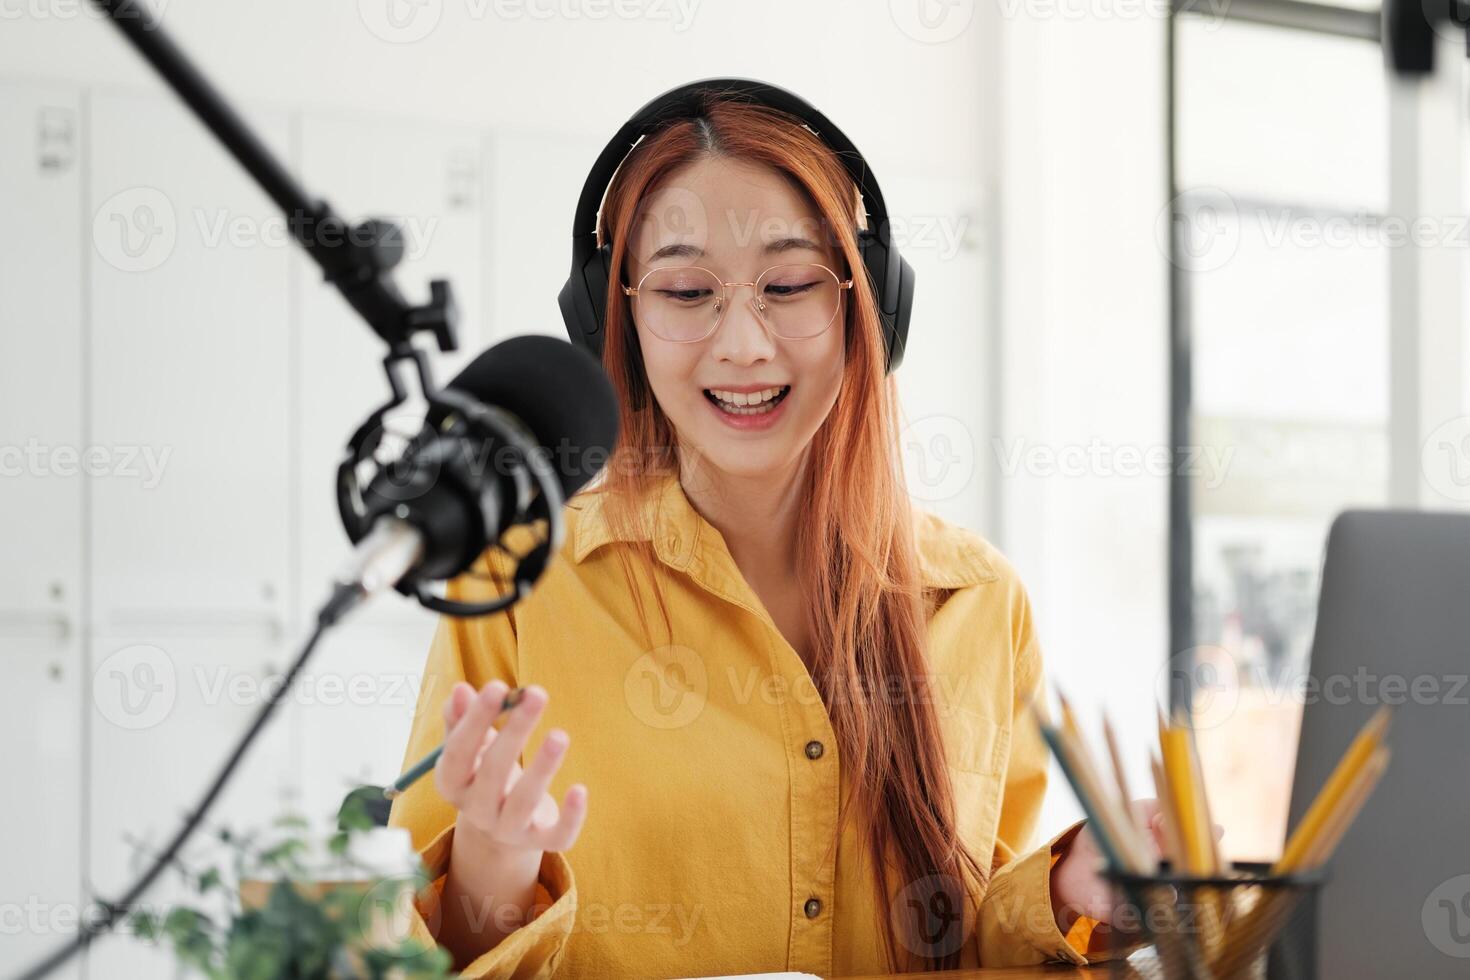 Live Podcast Session with Smiling Female Host photo